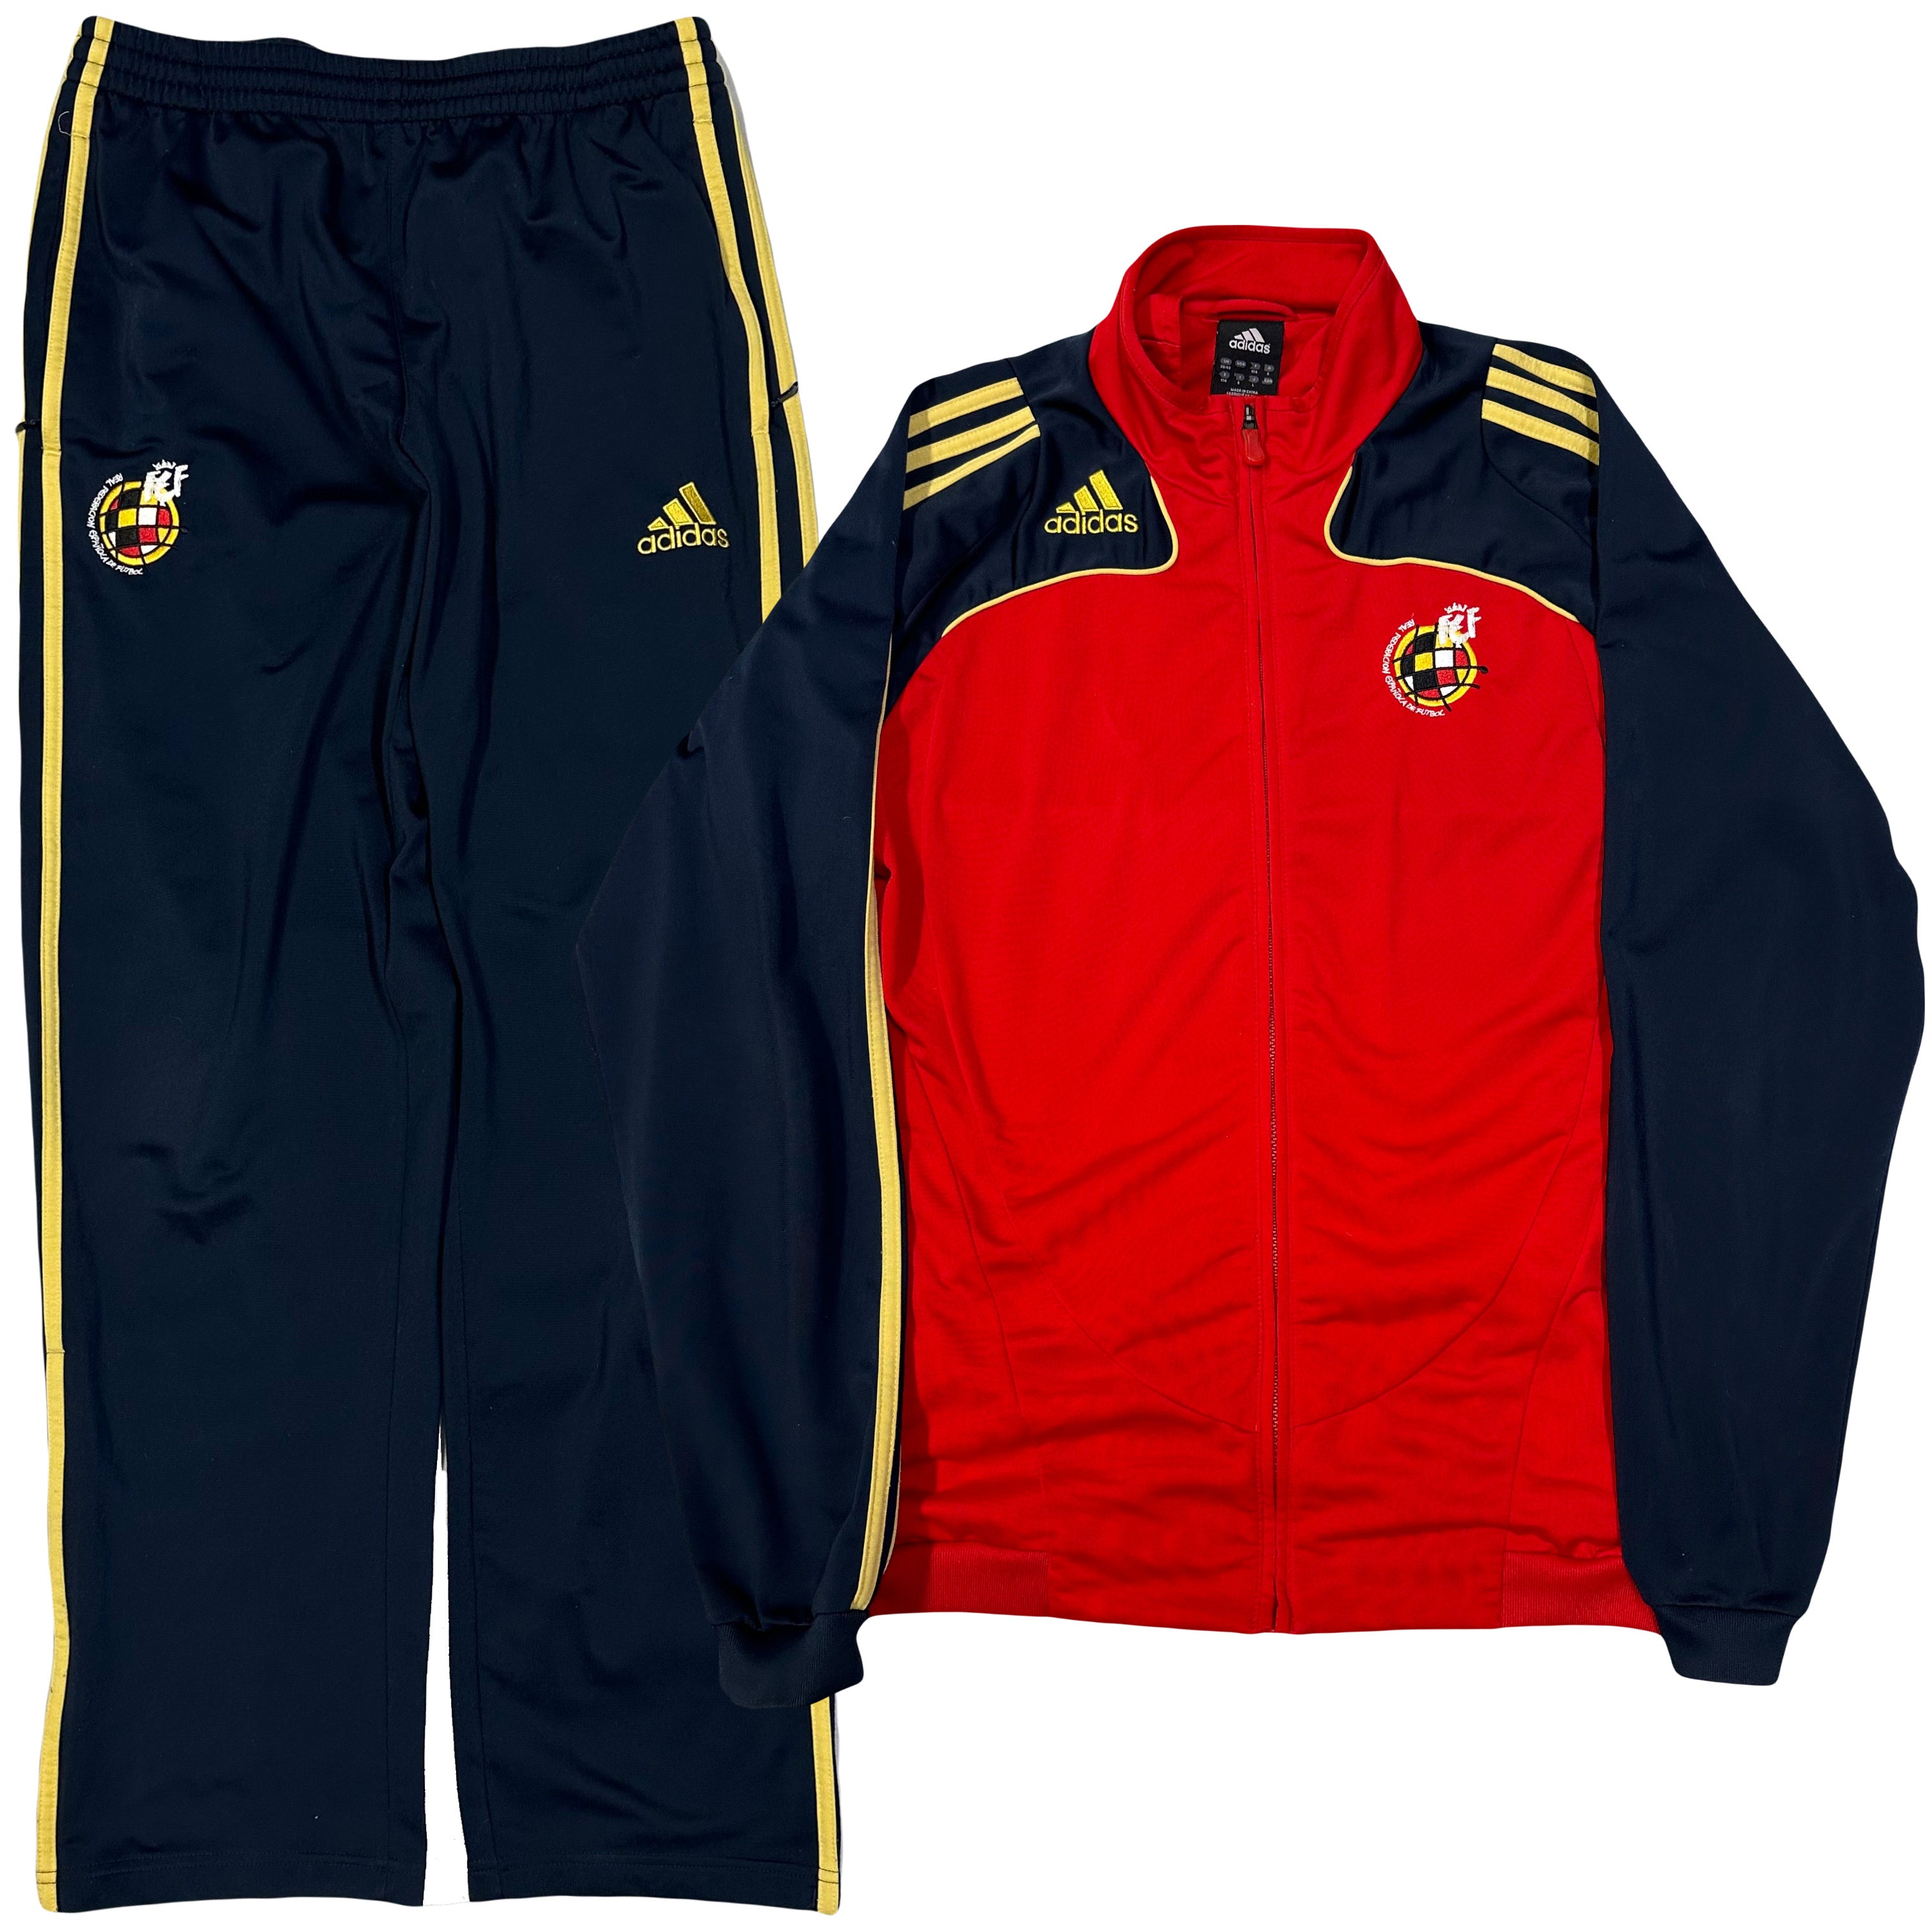 Adidas Spain 2007/08 Nylon Tracksuit In Red & Navy ( M )